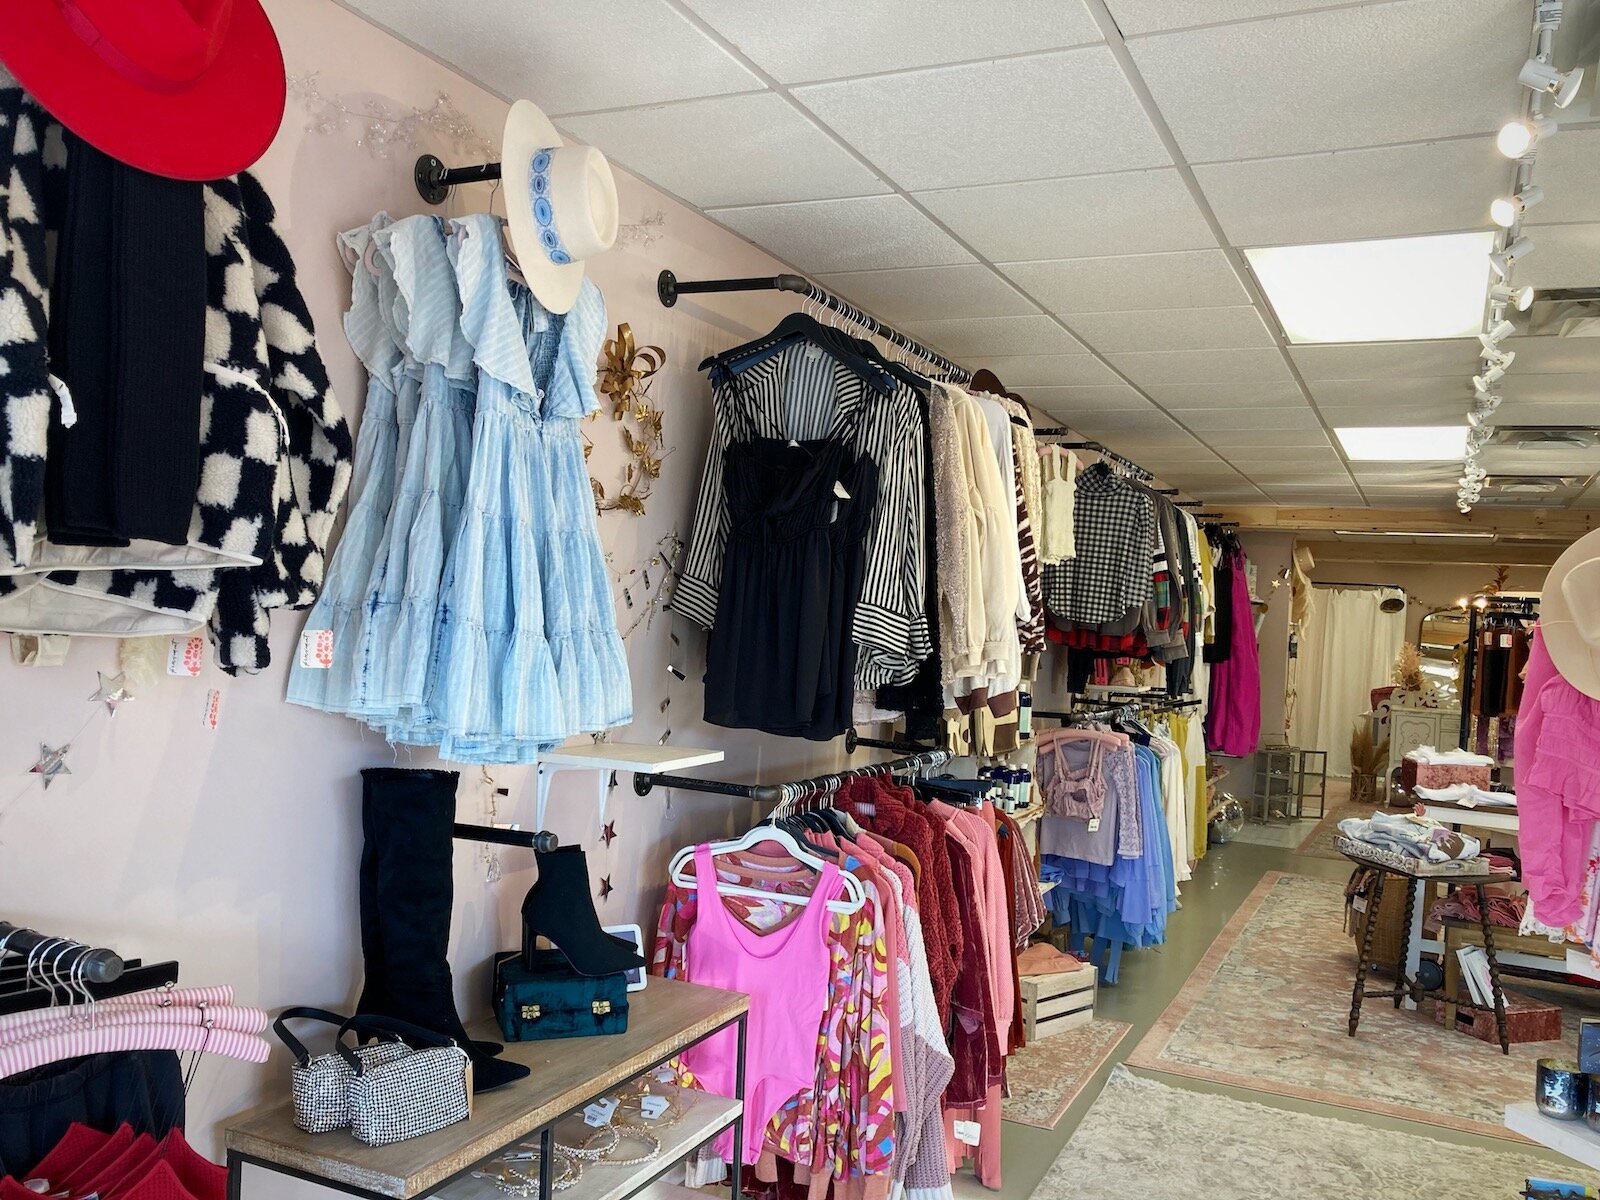 Meraki carries a whimsical selection of women’s clothing, home goods, beauty products, and children’s items.